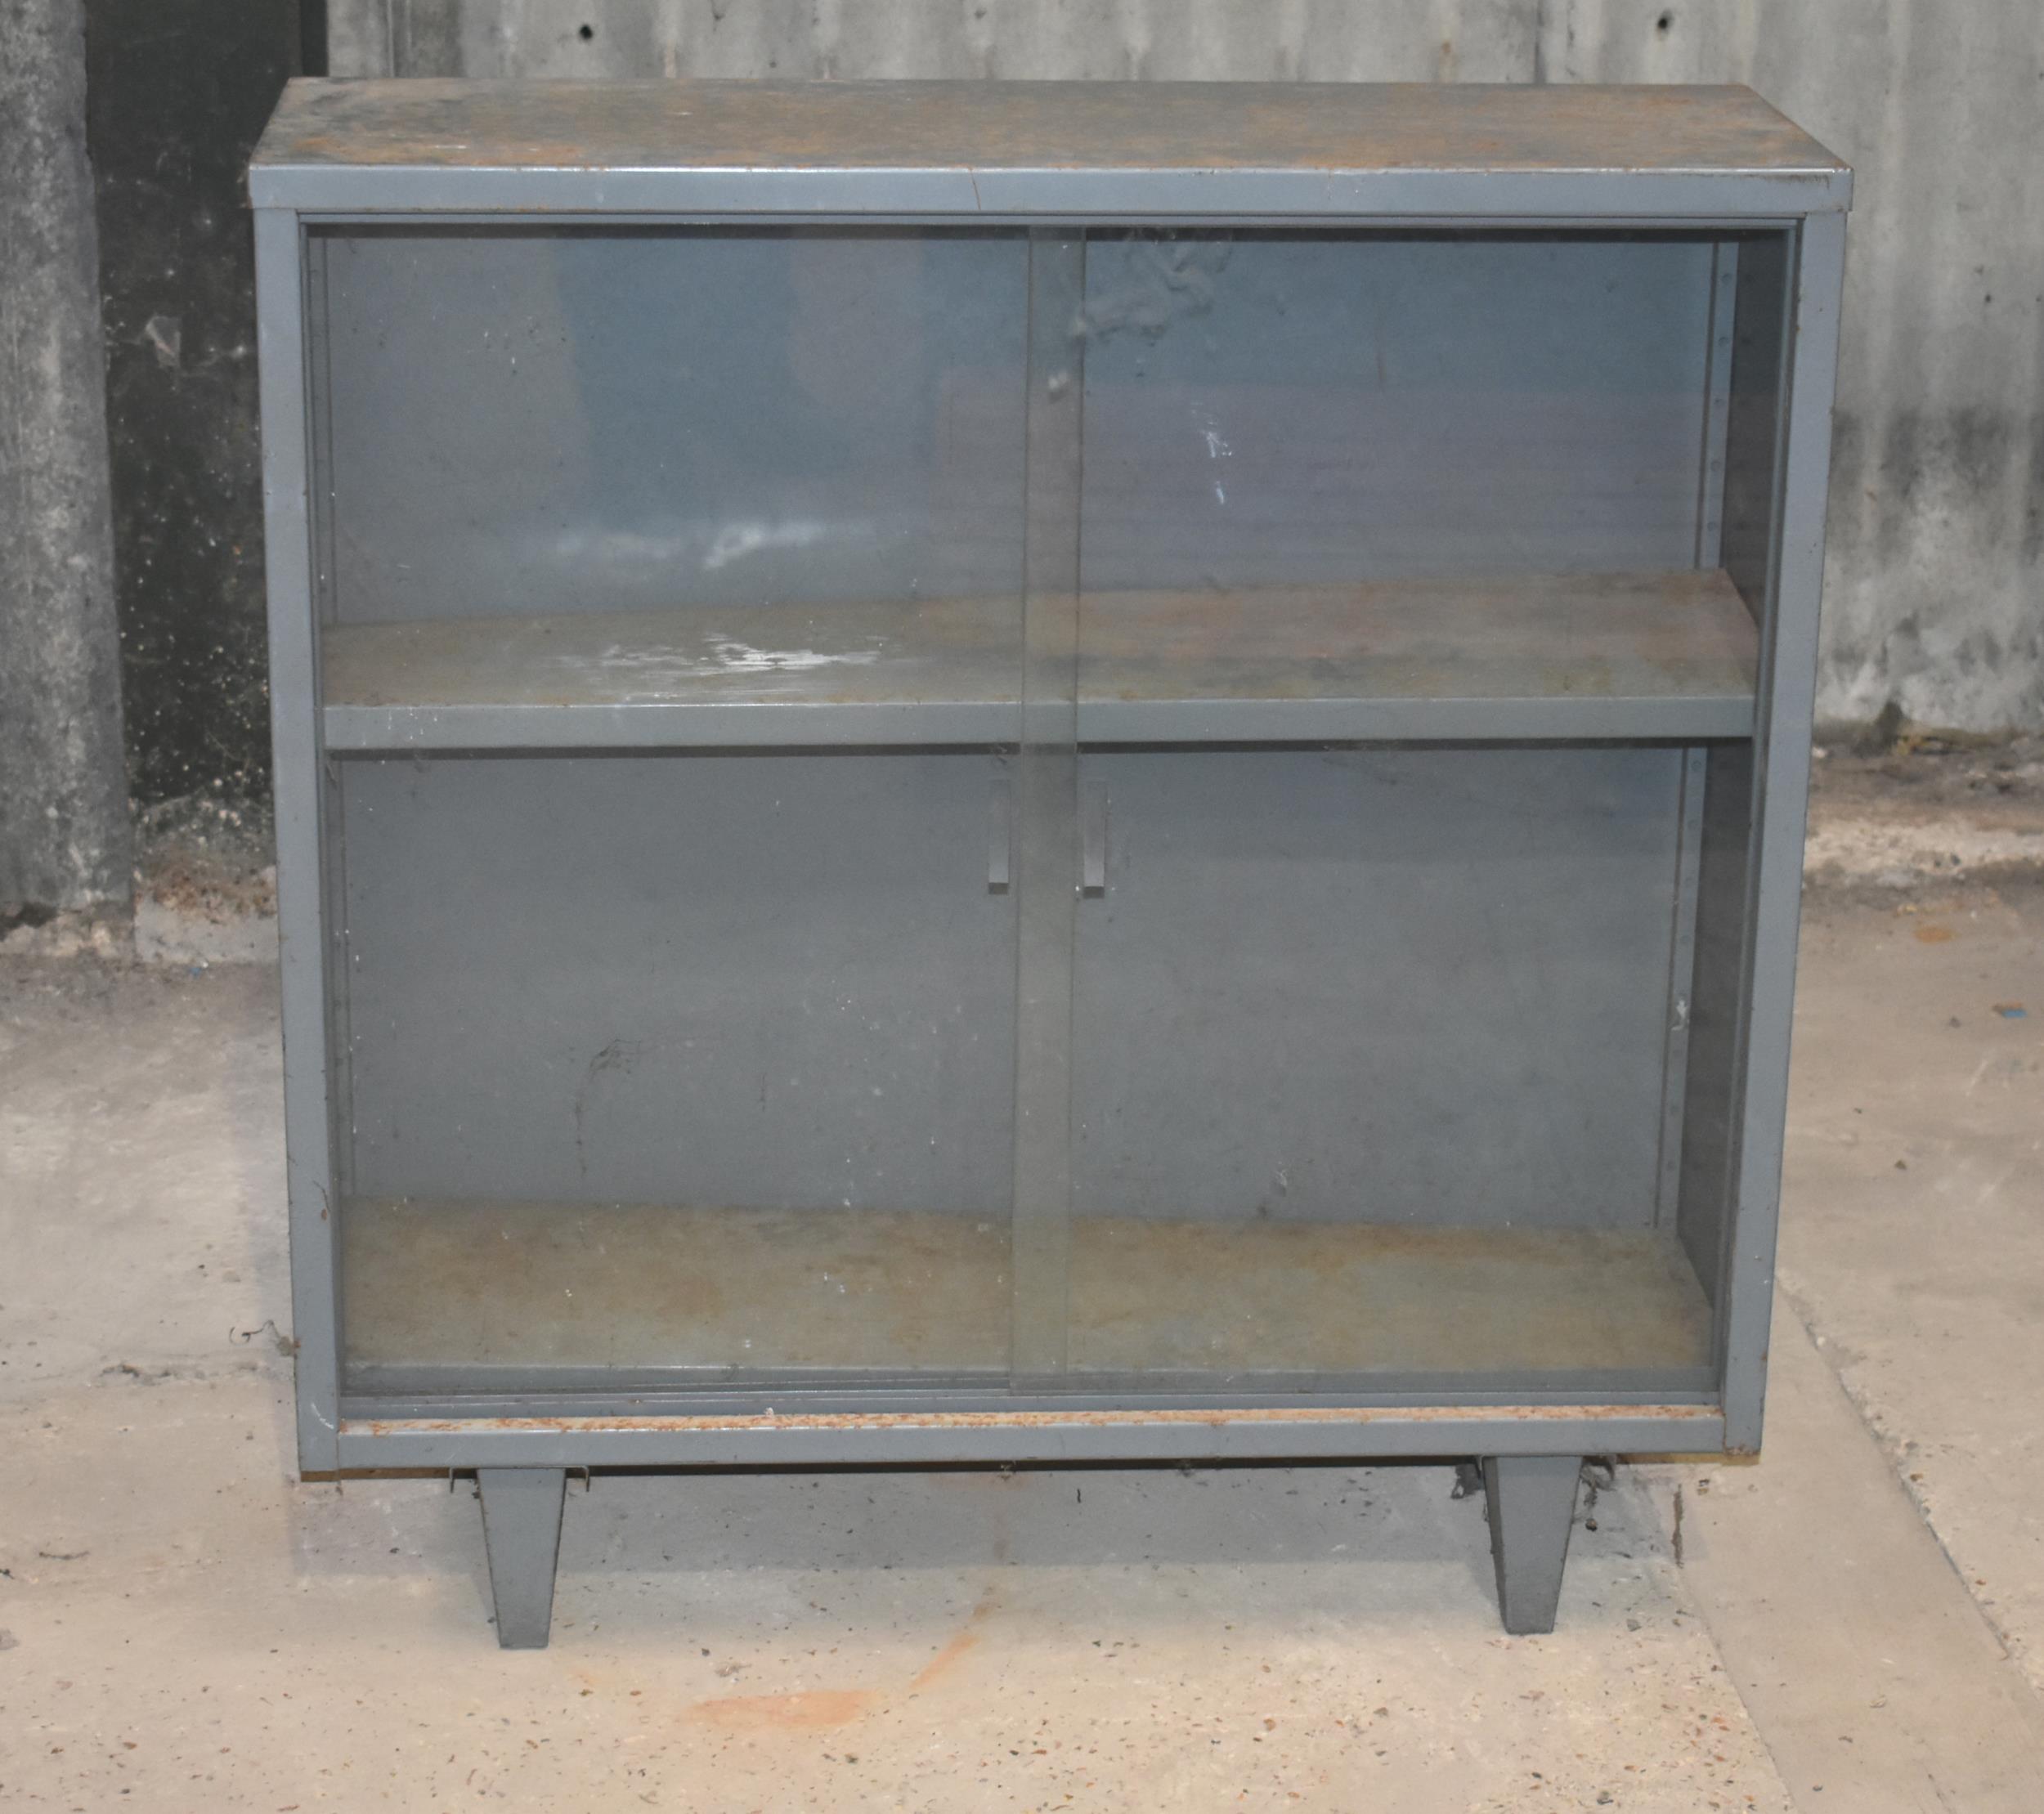 A glass front metal cupboard